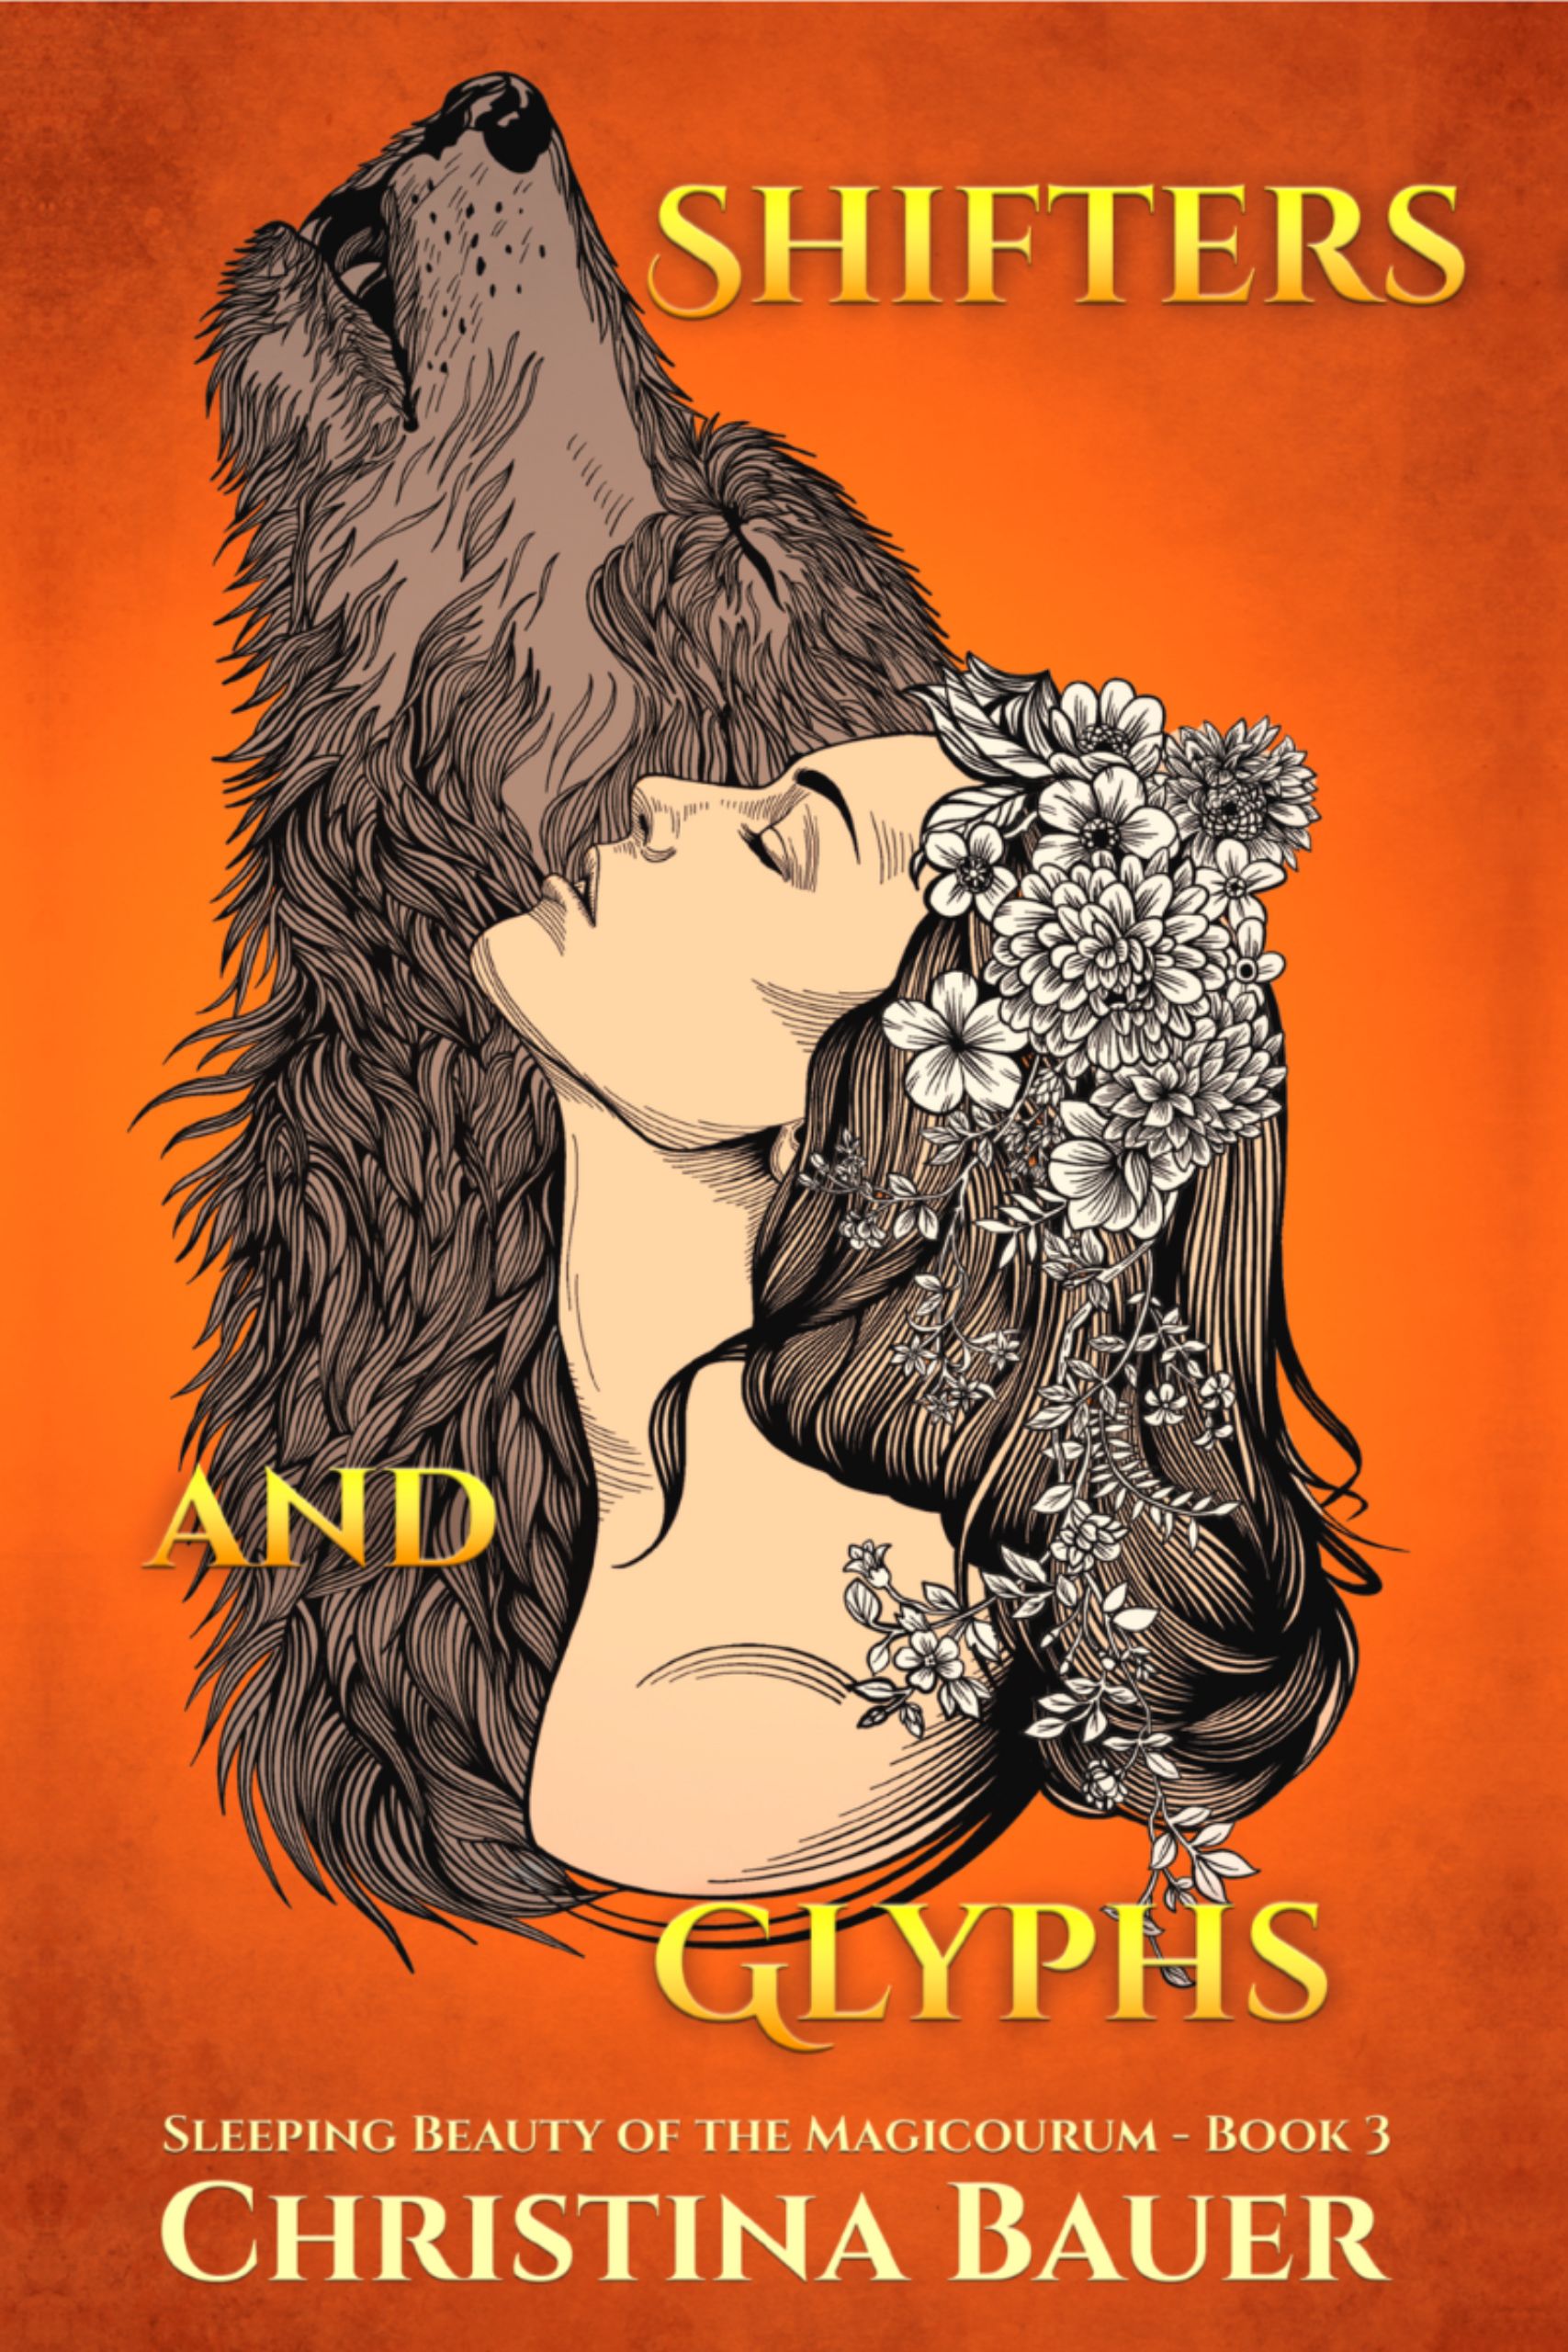 SHIFTERS AND GLYPHS (Book 3)